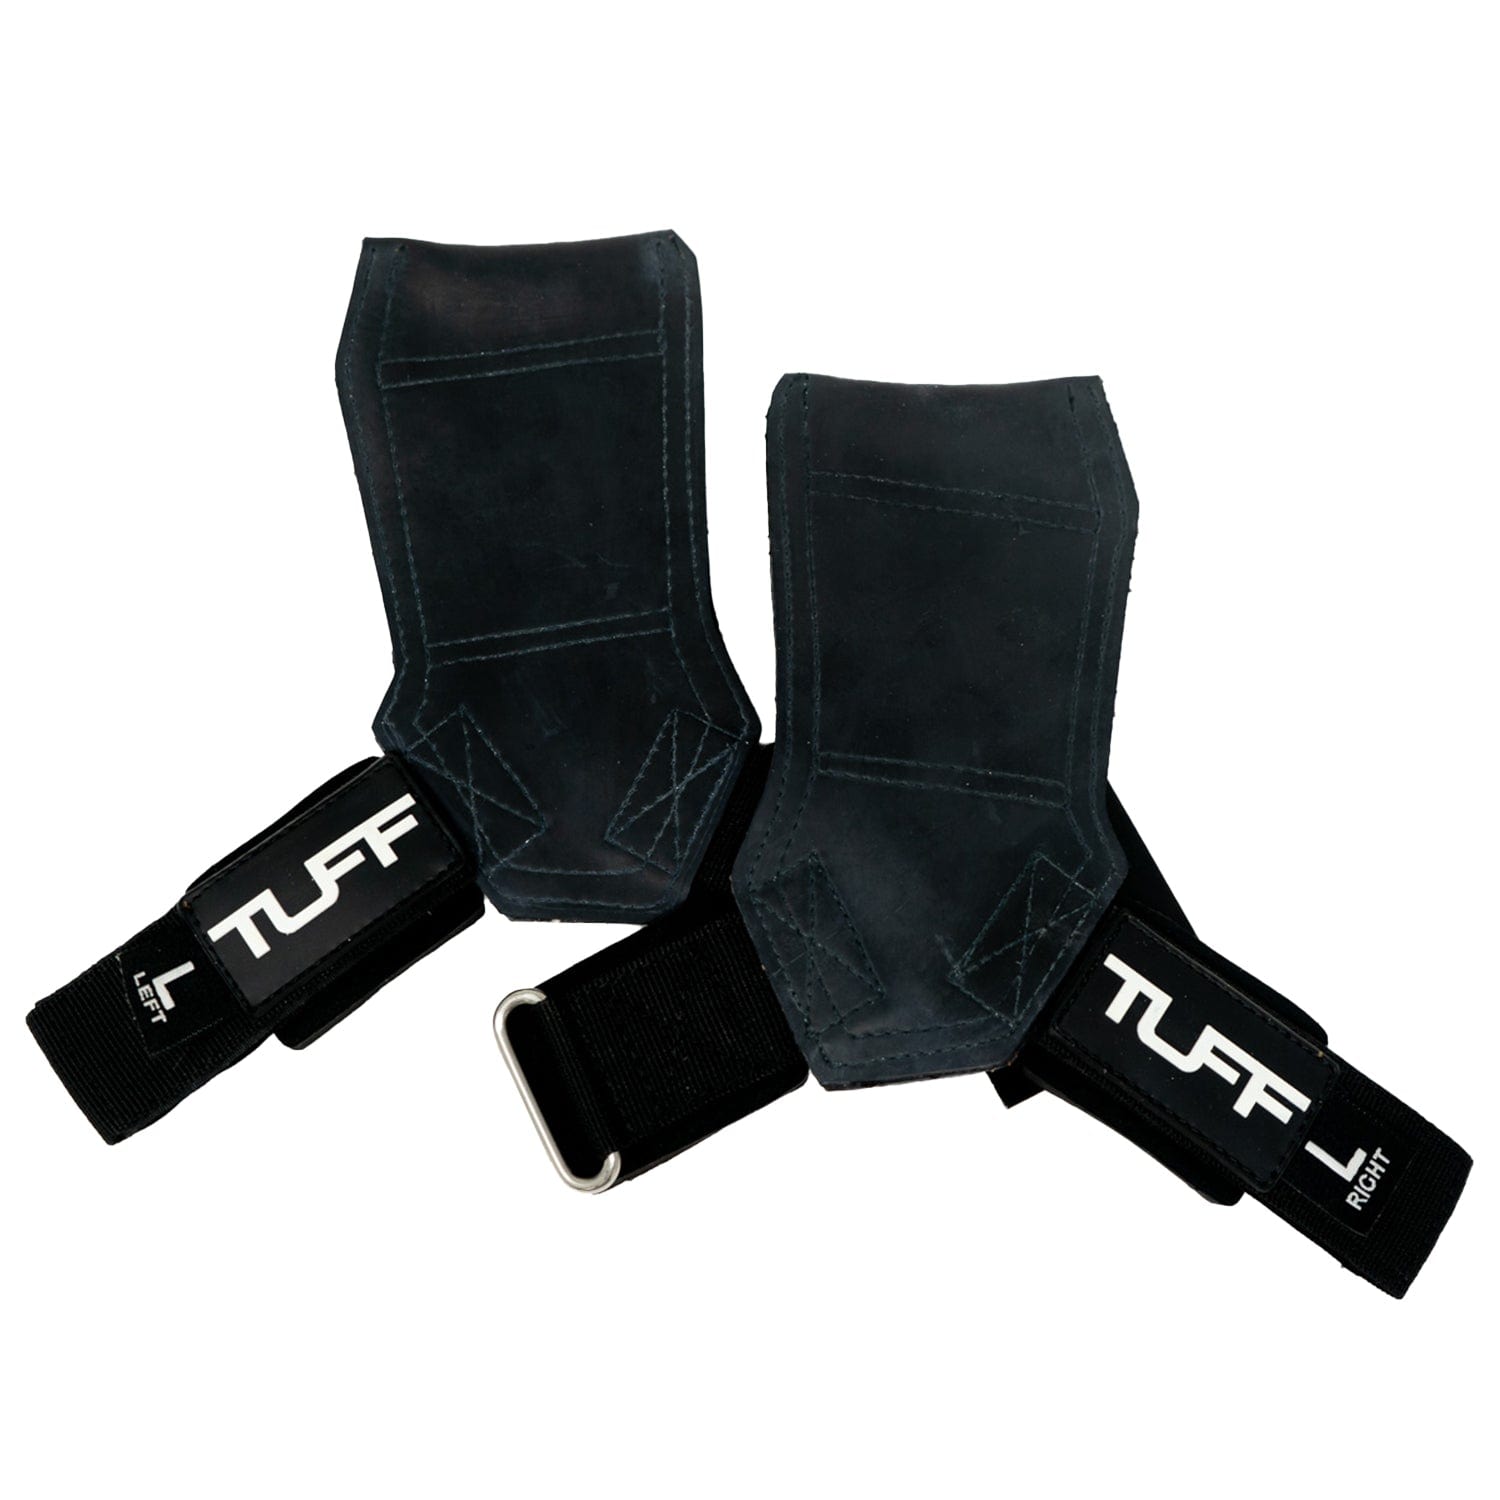 Grip Power Pads Elite Leather Gym Gloves with Built-in 2 Inches Wide Wrist  Wraps